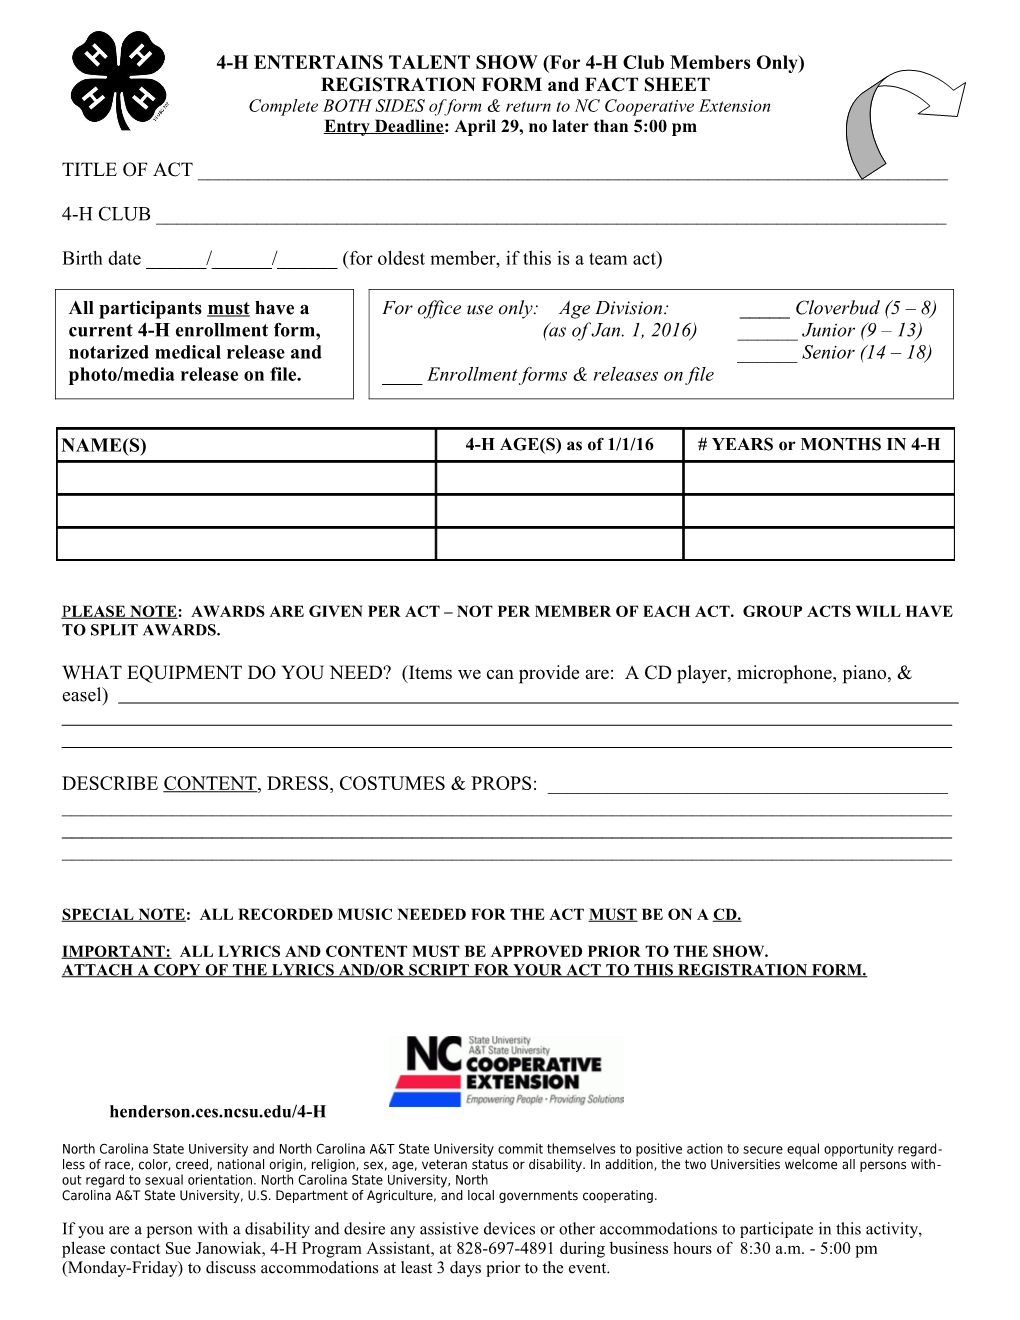 4-H Entertains Registration Form and Fact Sheet